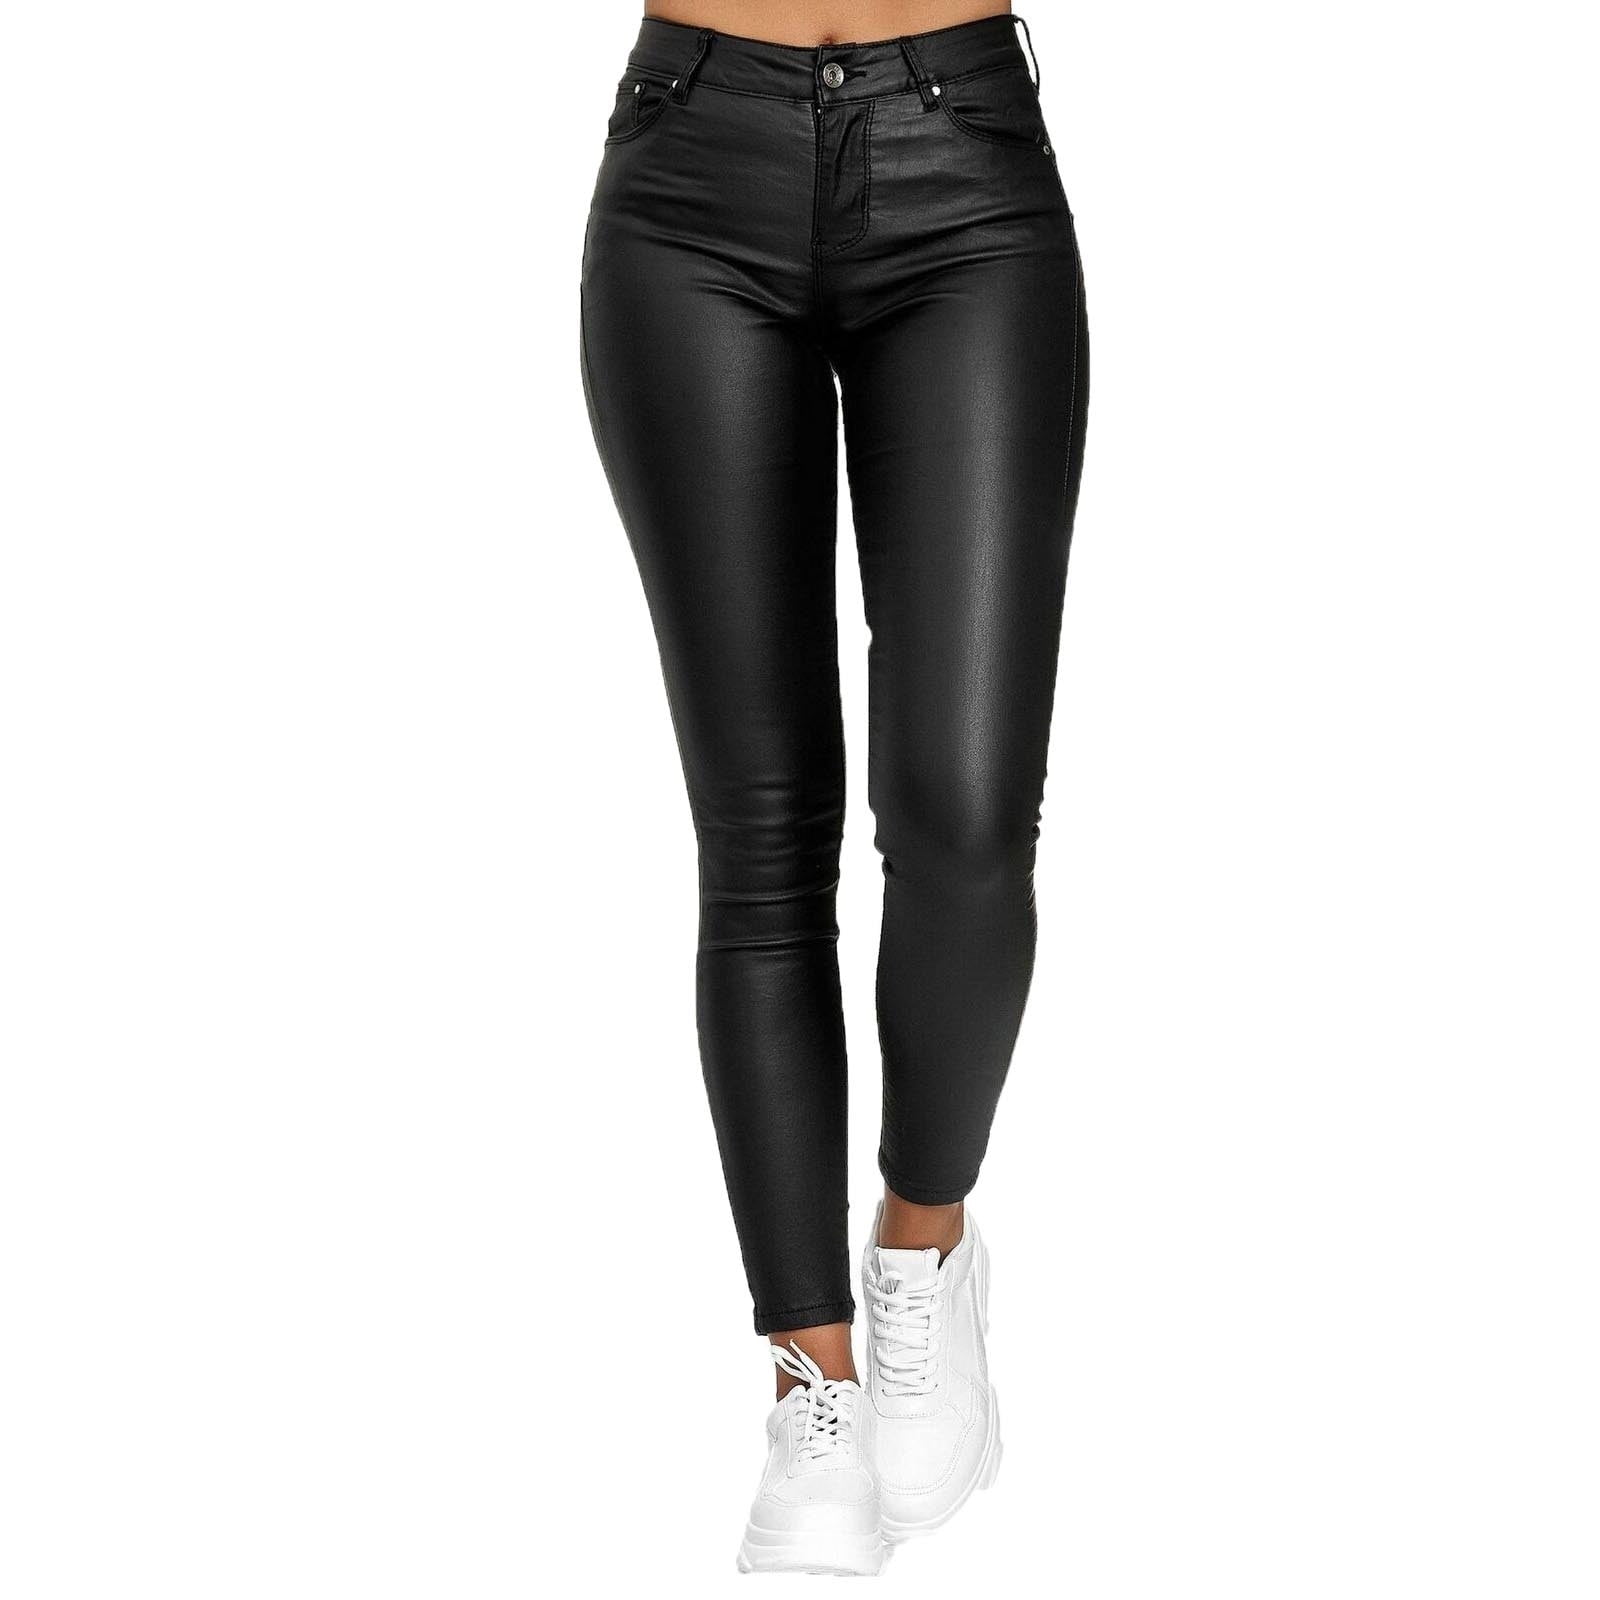 Women's Skinny Leather Pants High Waisted Stretch Pull On Ankle Pants  Casual Slim Fit Leggings Tights with Pockets 